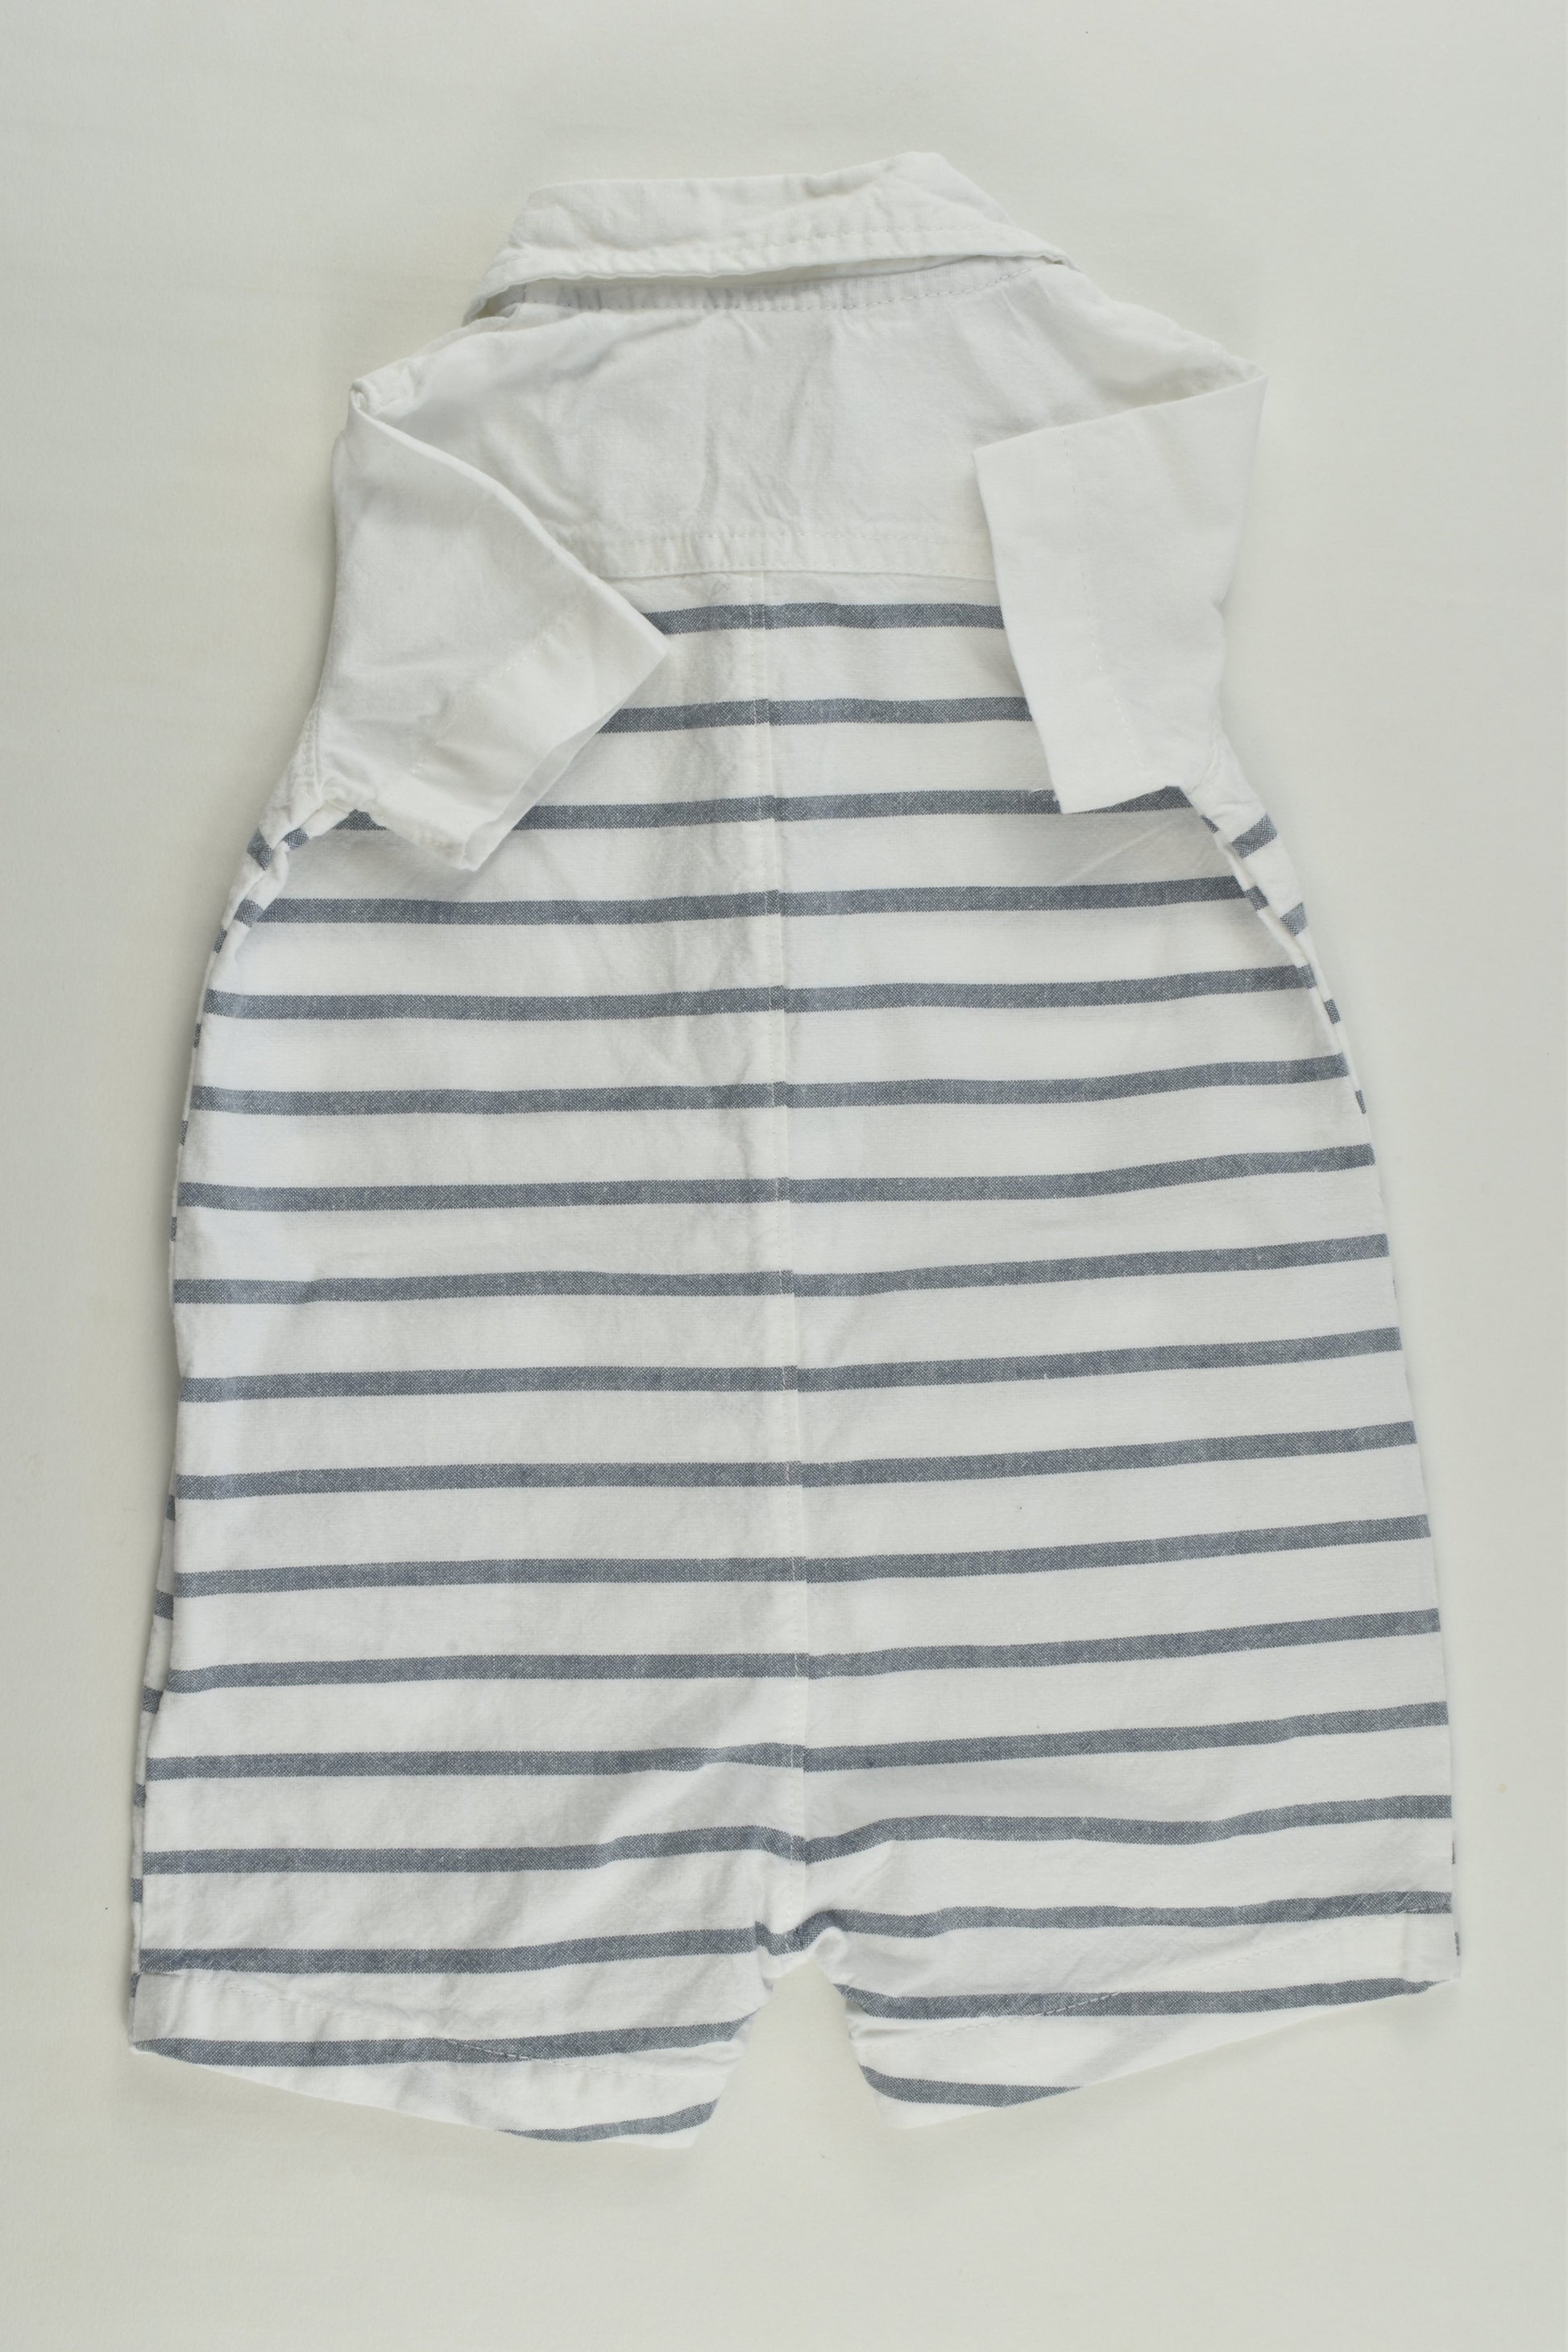 Carter's Size 000 (3 months) Striped Collared Romper